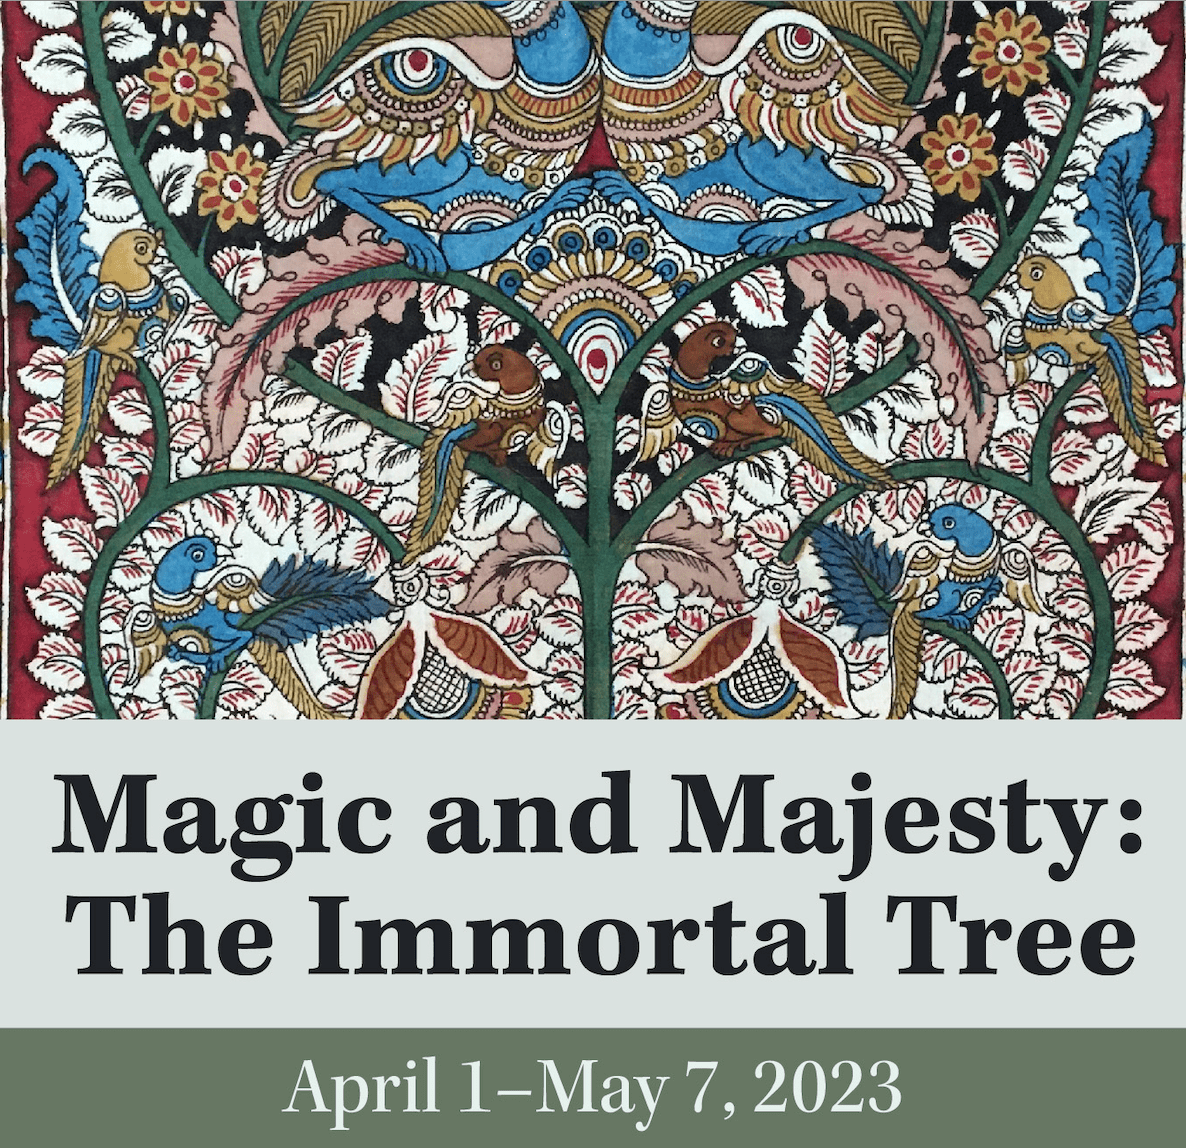 Cover image for "Magic and majesty: The Immortal Tree"